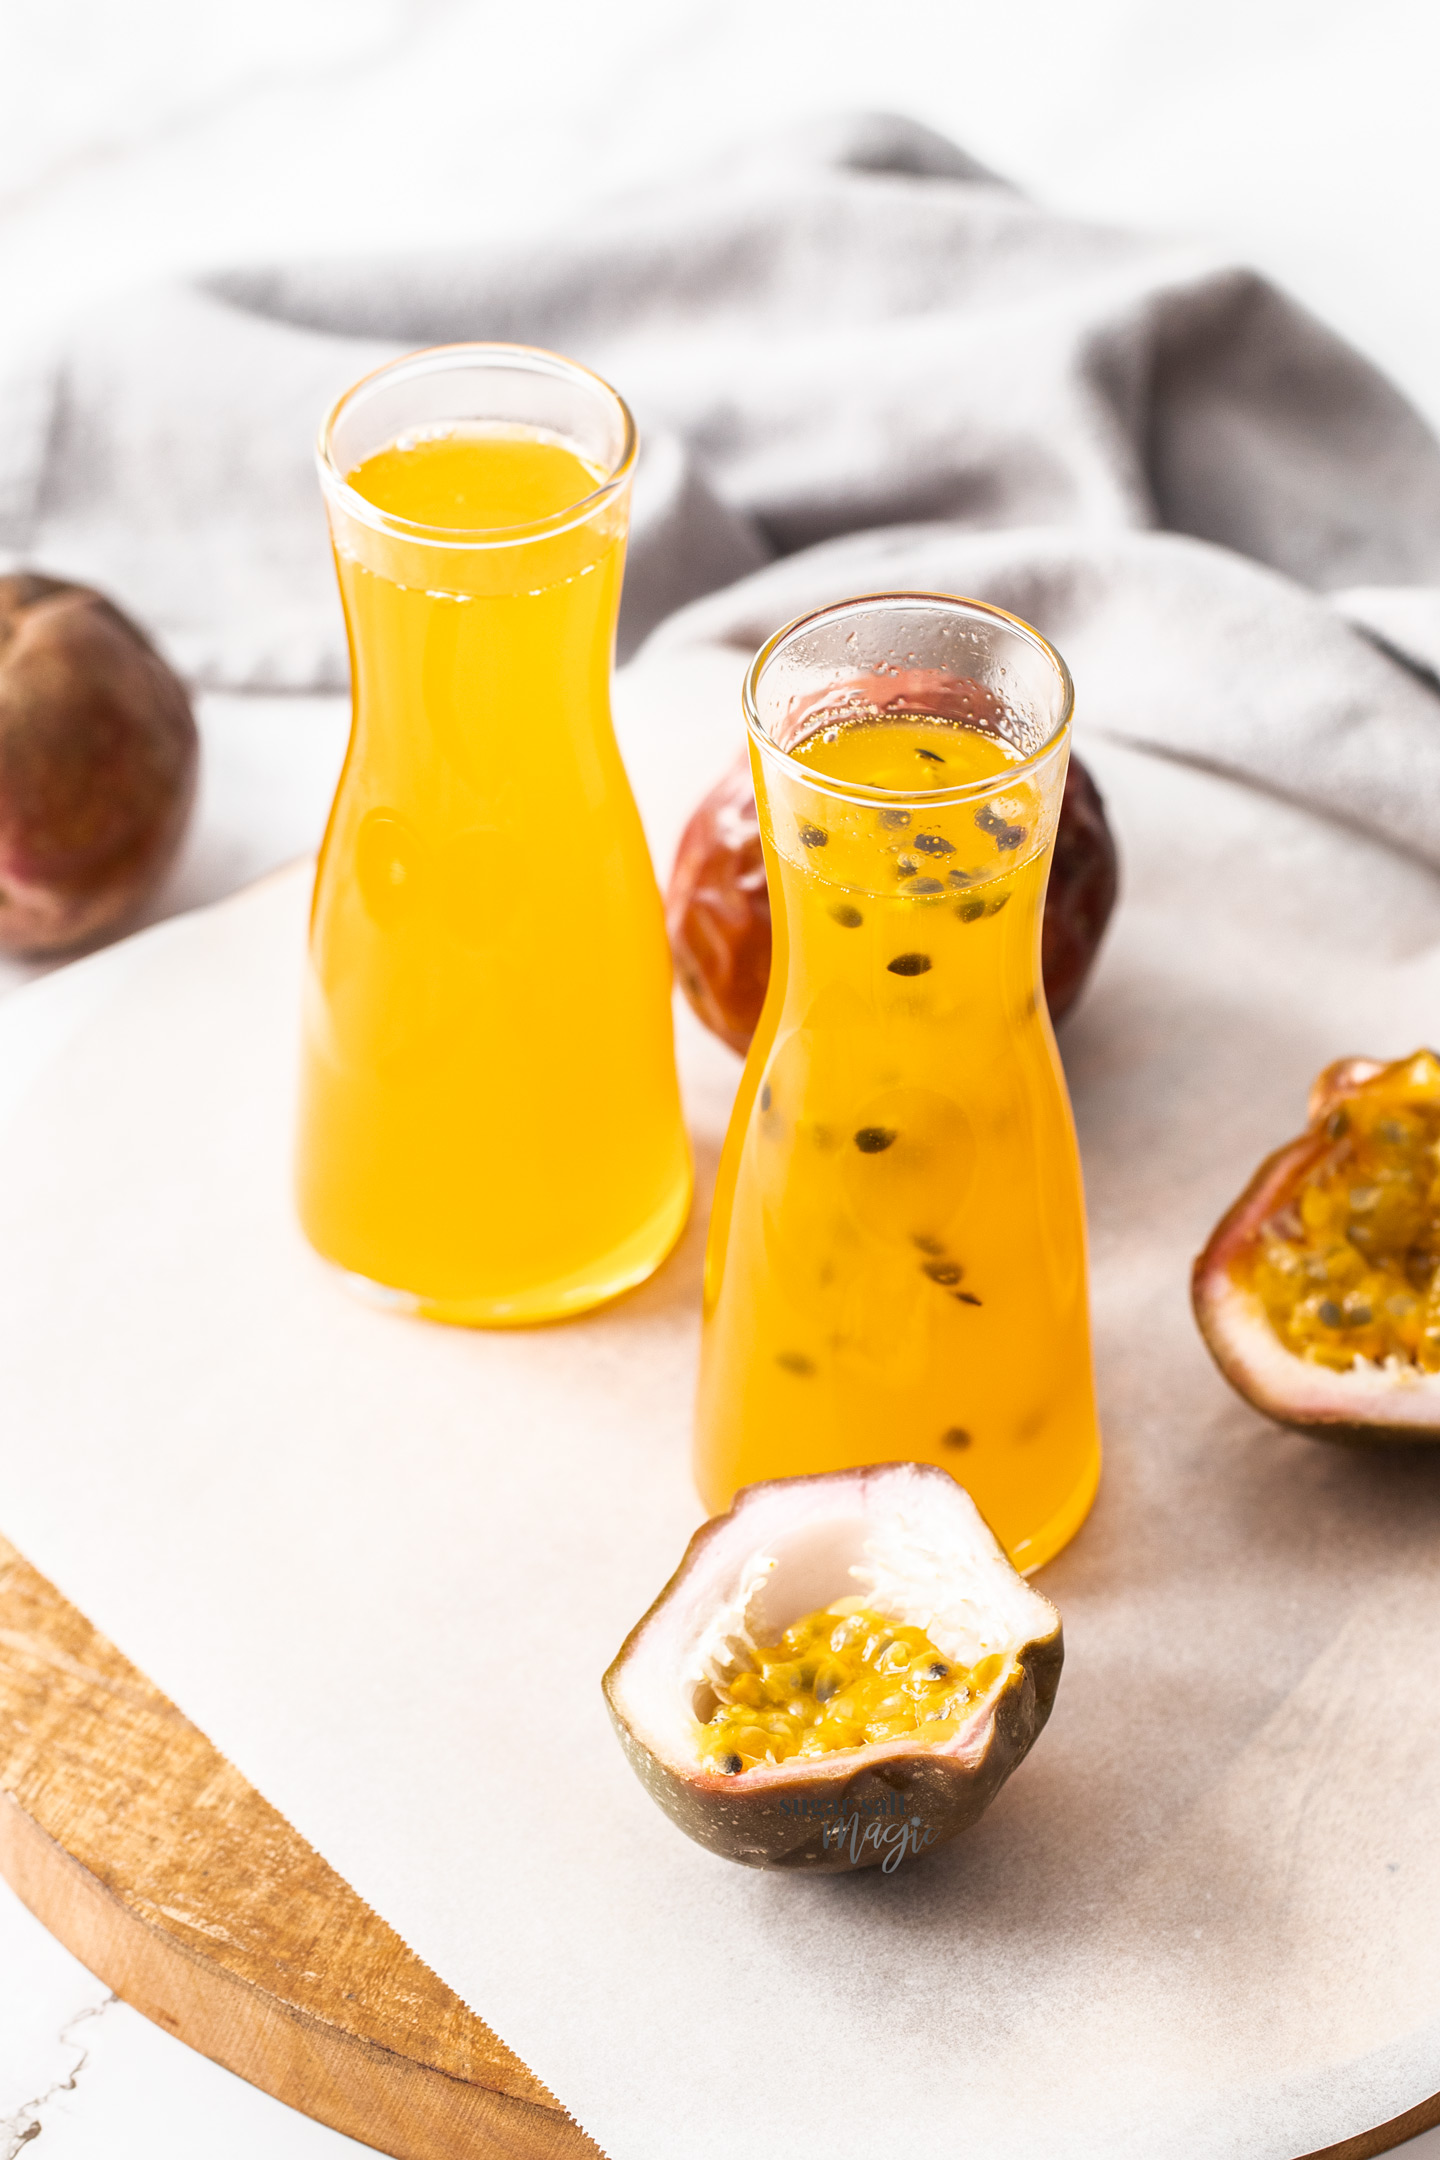 Two bottles of passionfruit syrup surrounded by passionfruits.